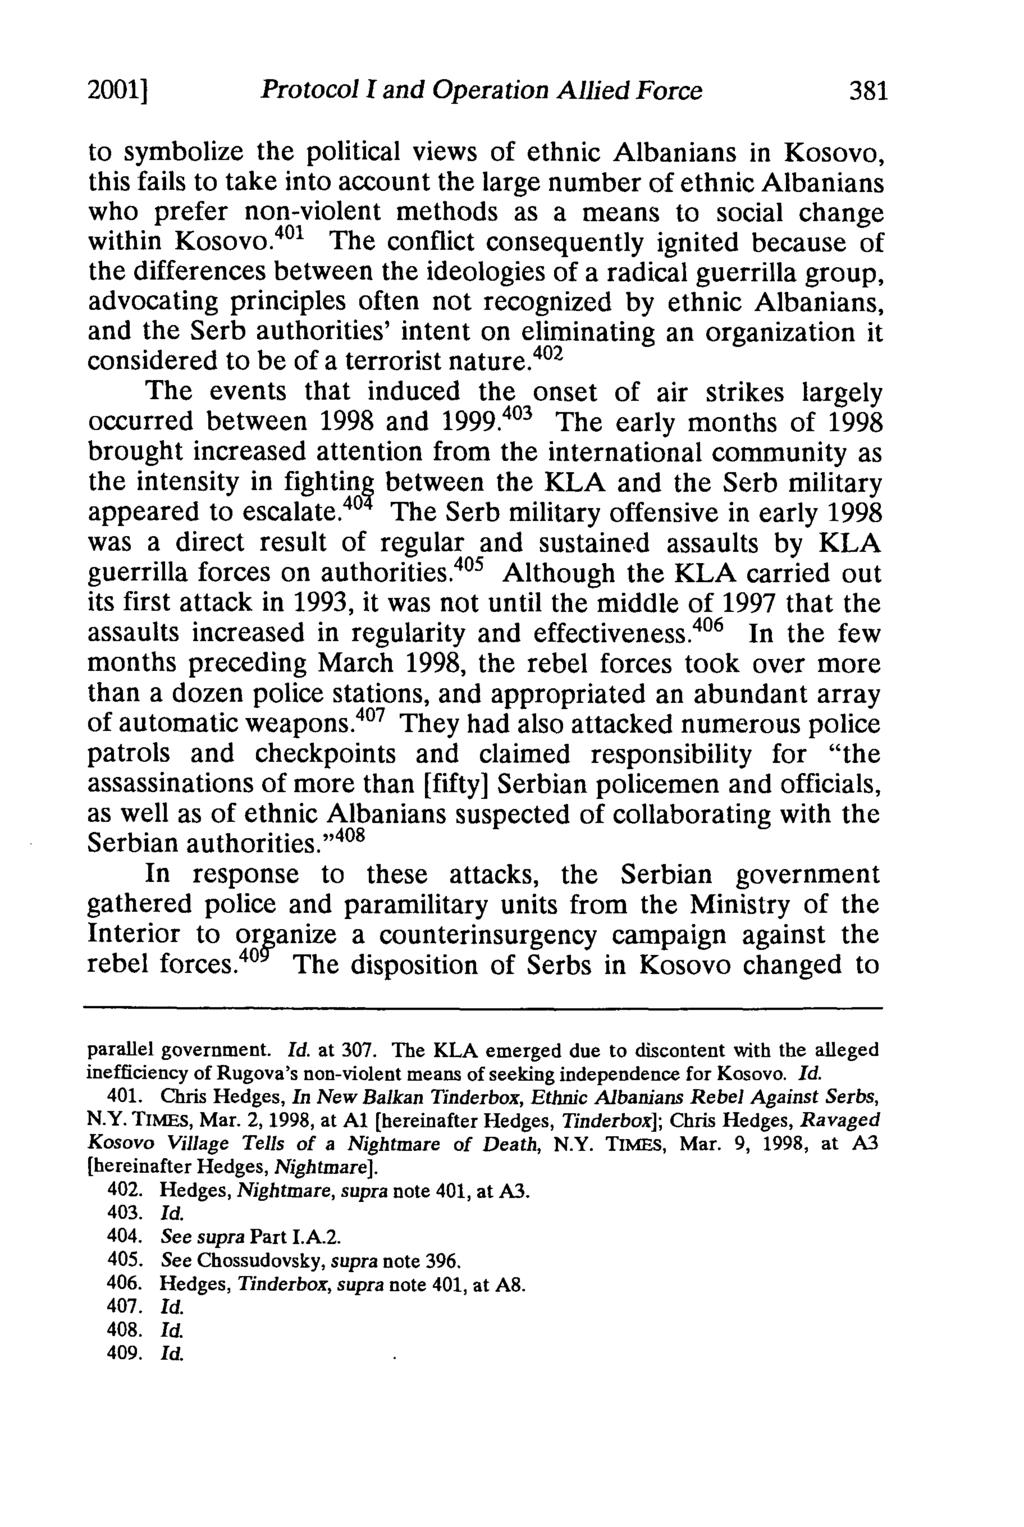 2001] Protocol I and Operation Allied Force to symbolize the political views of ethnic Albanians in Kosovo, this fails to take into account the large number of ethnic Albanians who prefer non-violent